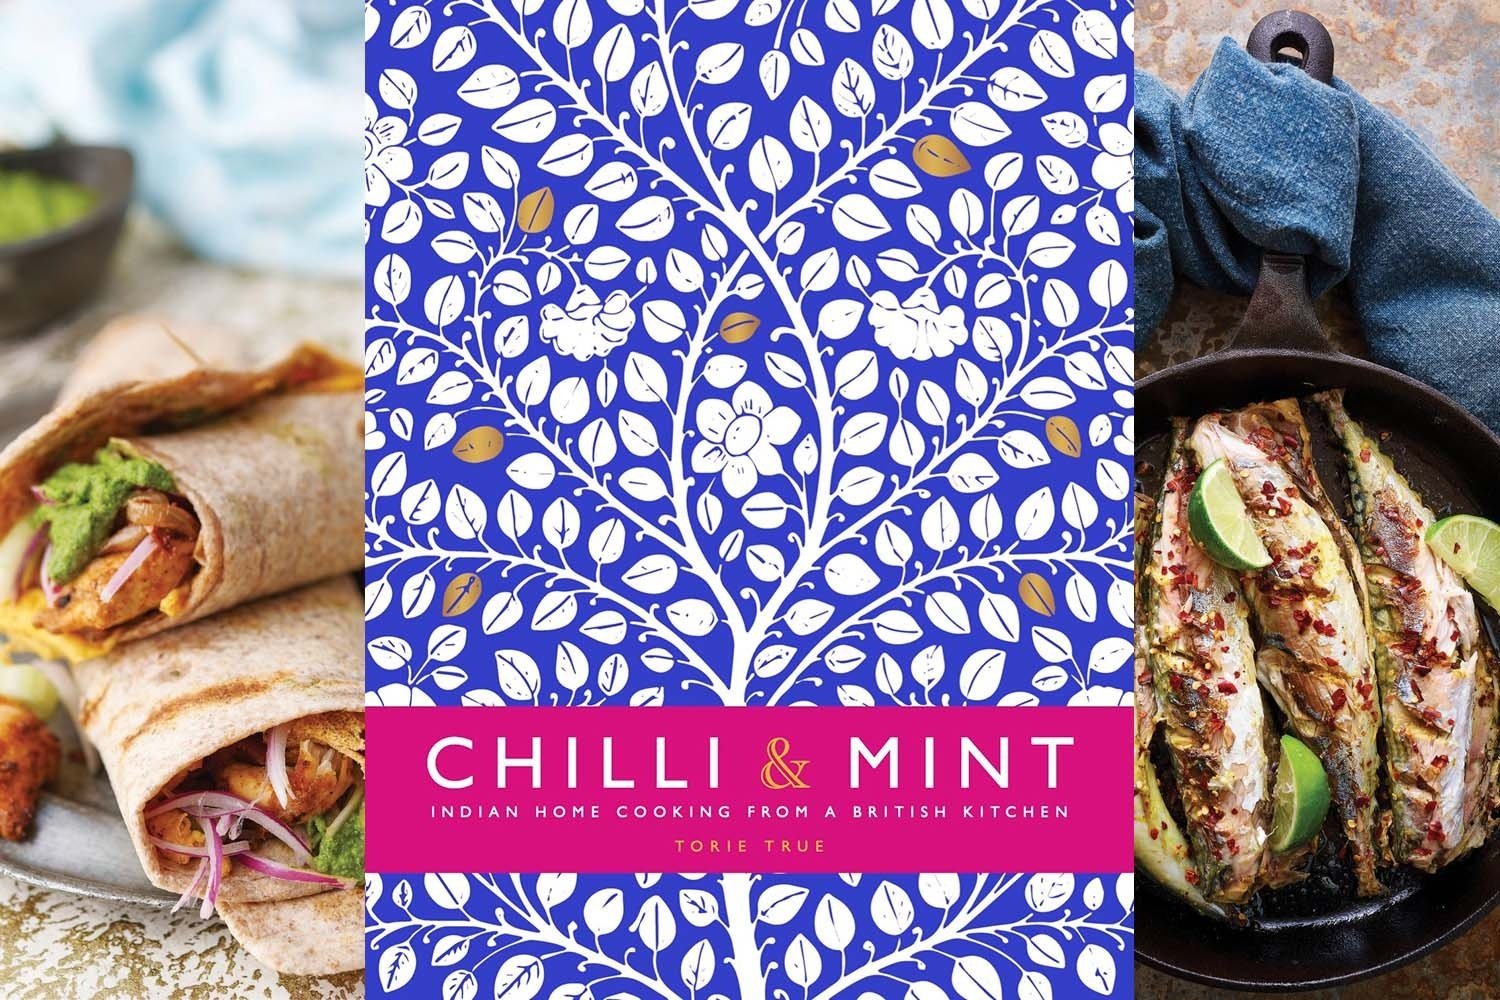 Behind The Cookbook: Chilli & Mint